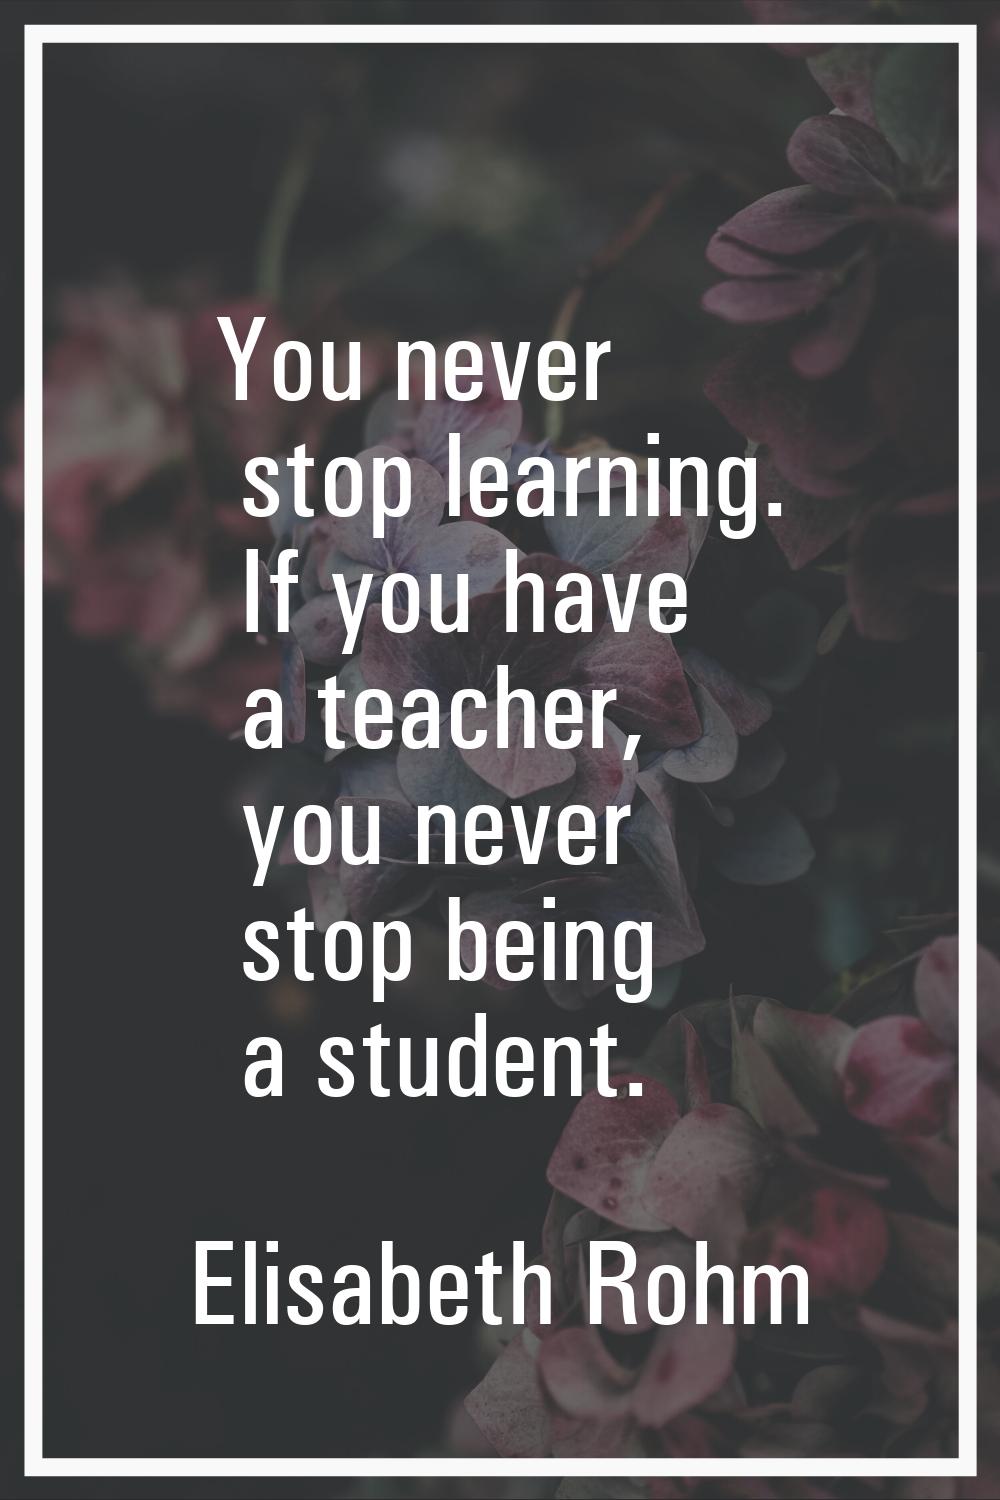 You never stop learning. If you have a teacher, you never stop being a student.